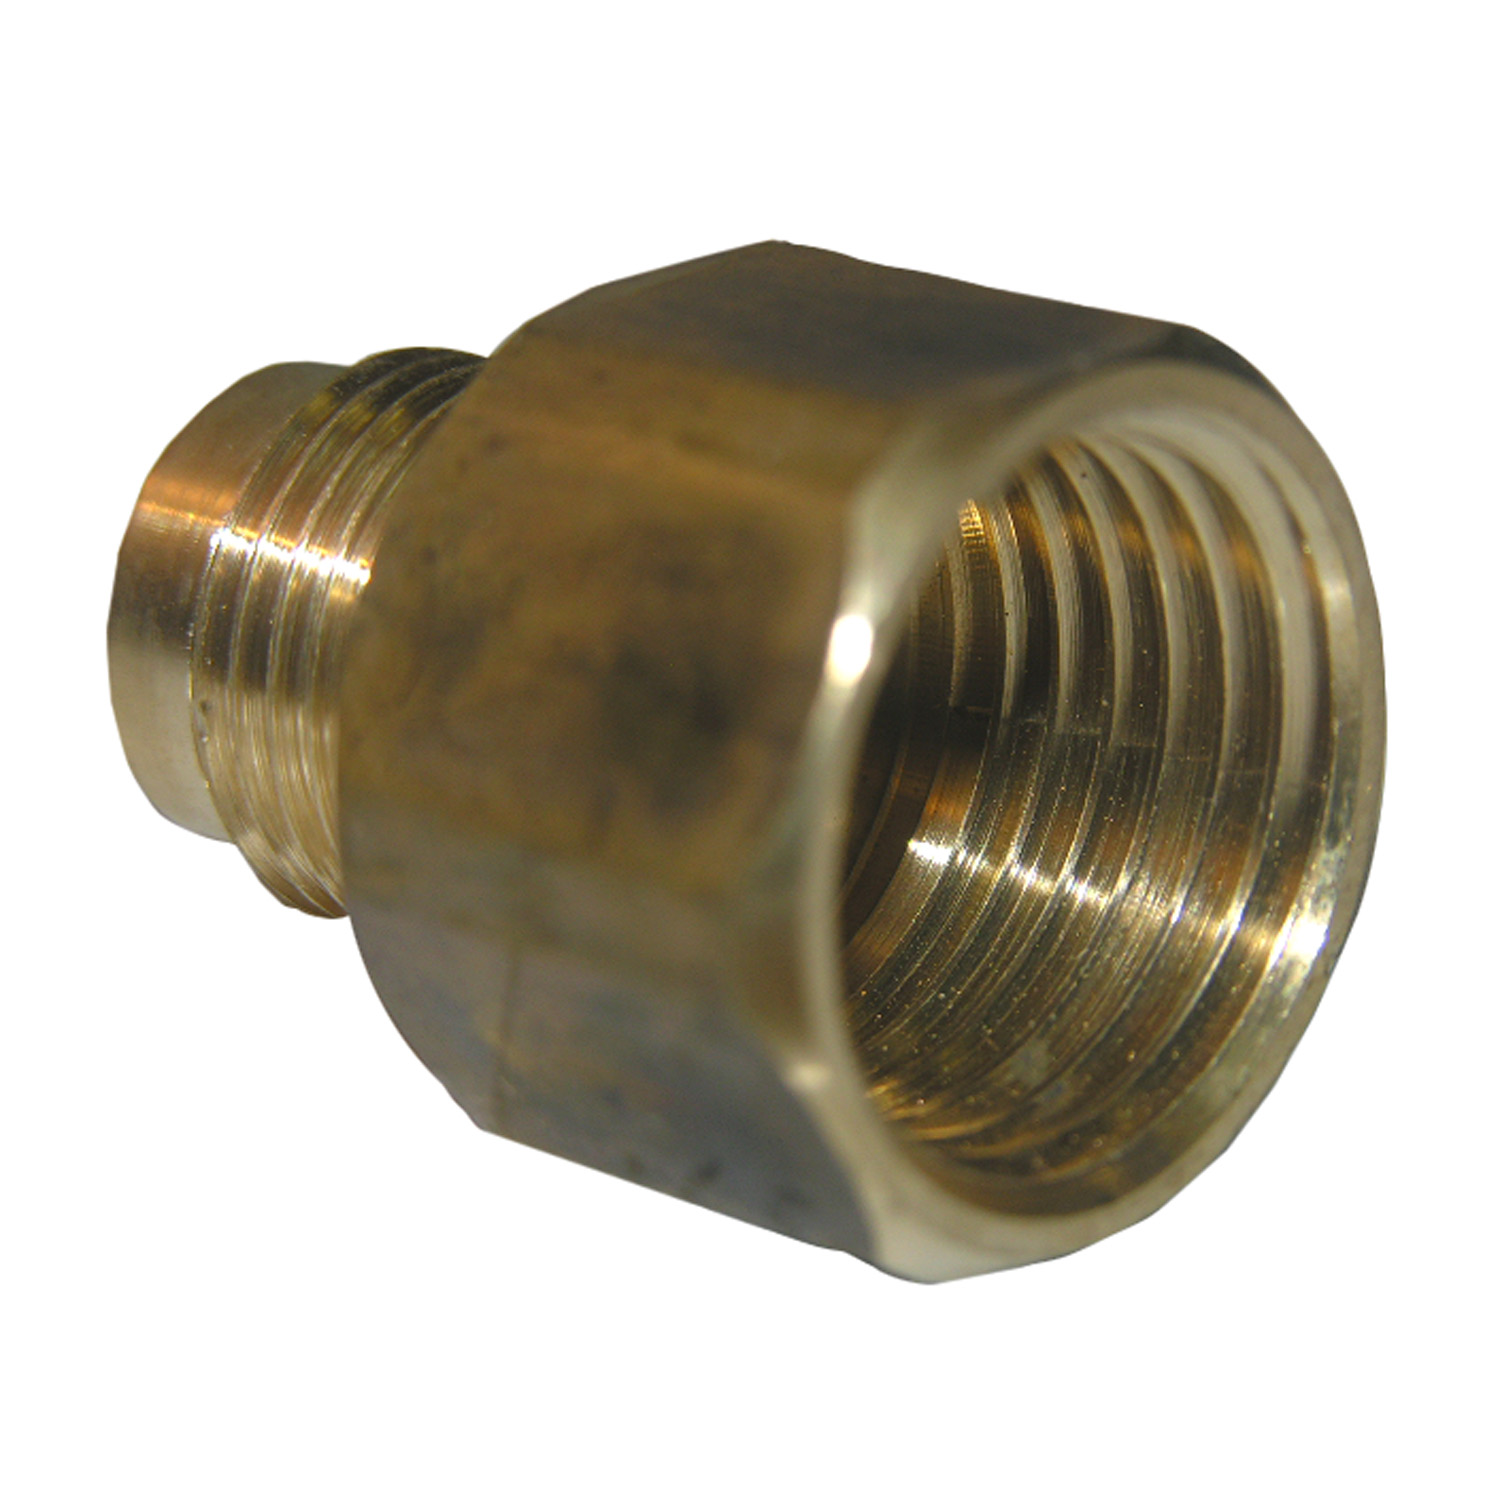 17-4631 Pipe Adapter, 3/8 in, Male Flare x FPT, Brass, 900 psi Pressure